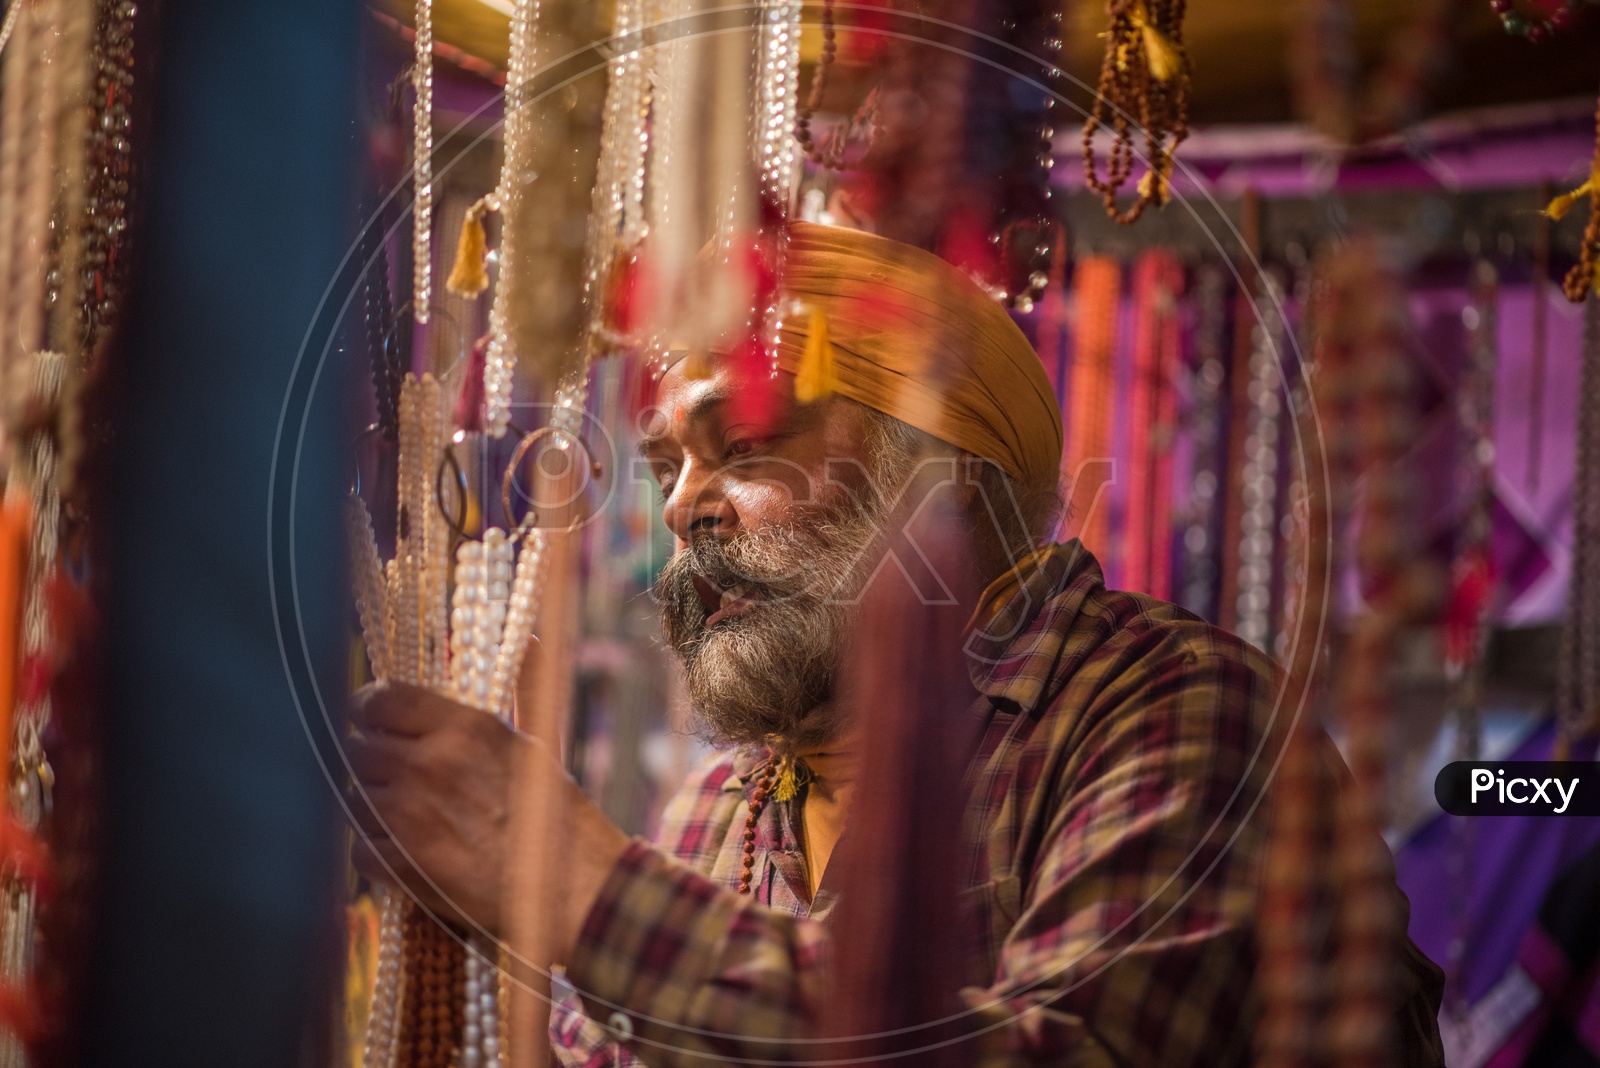 A Sikh man buying pearls jewellery from a vendor stall